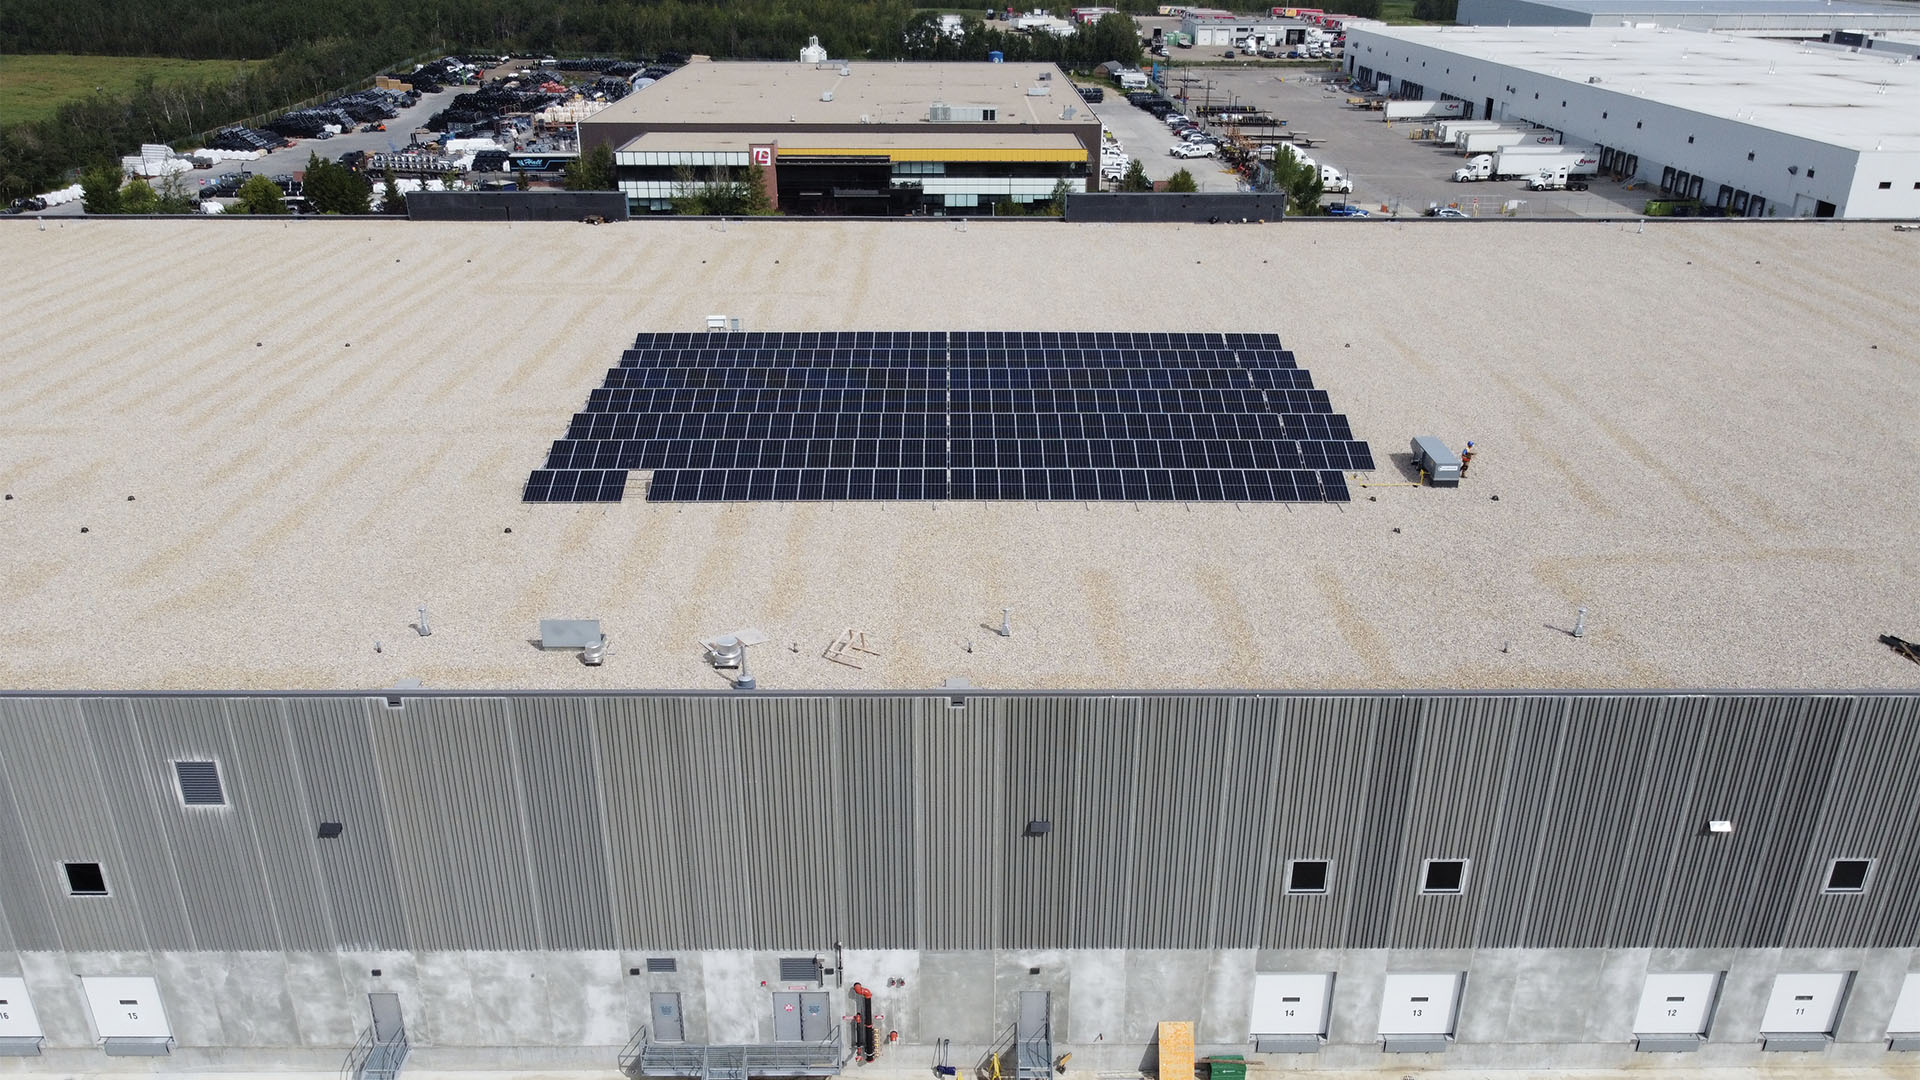 drone photo of solar panels on warehouse